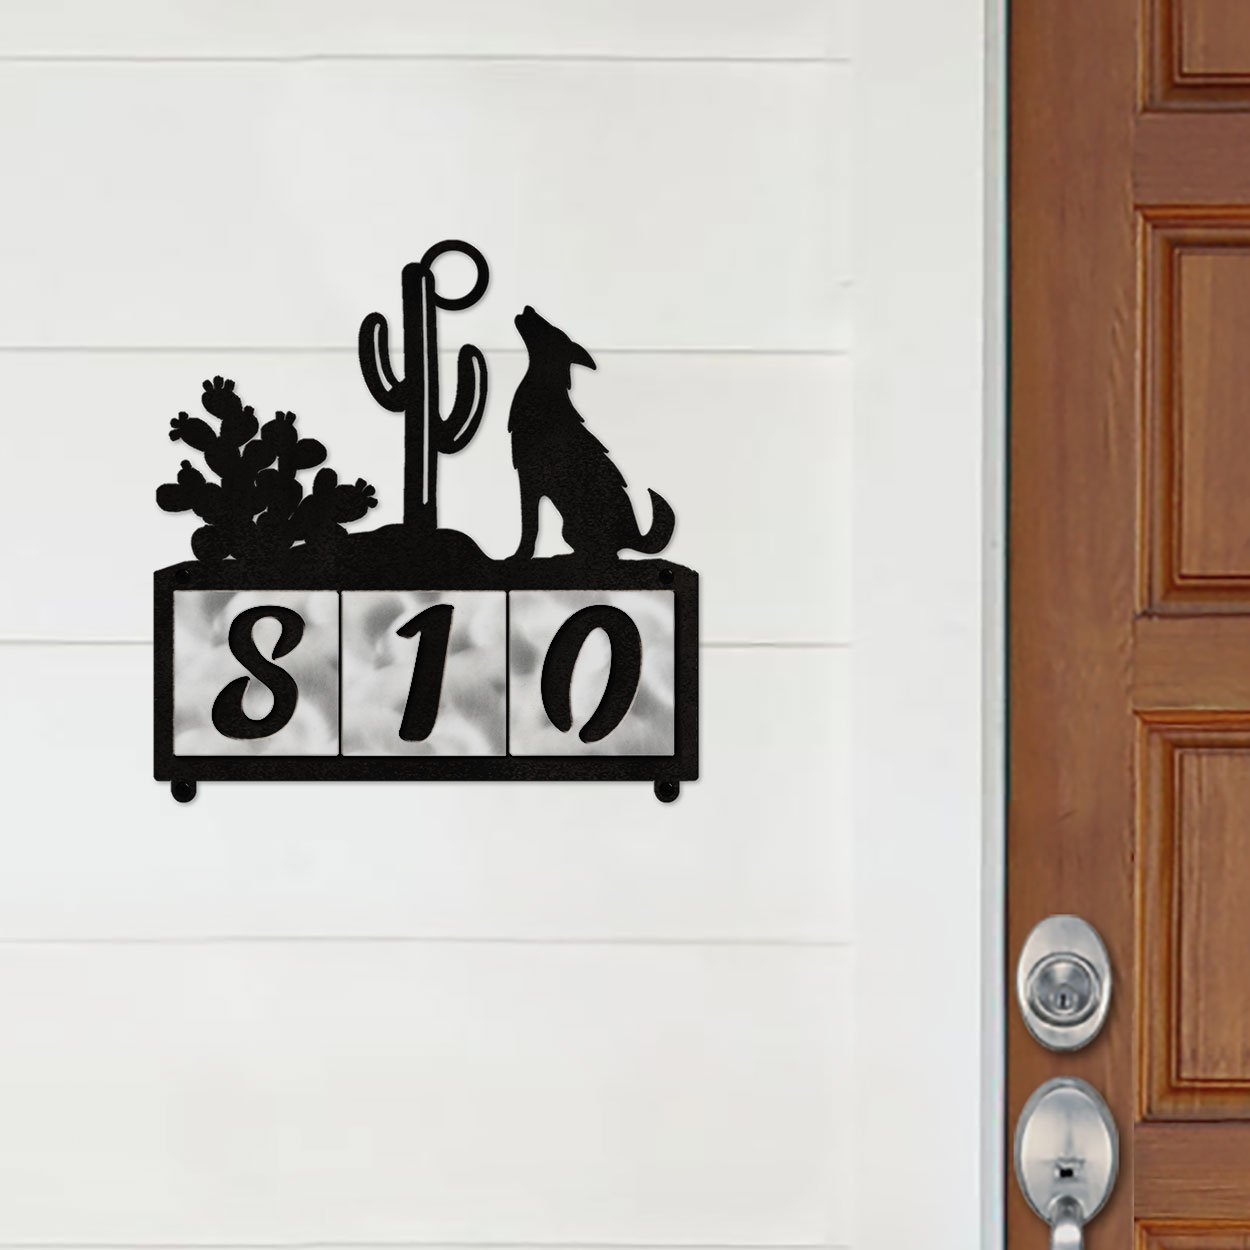 607083 - Howling Coyote Design 3-Digit Horizontal 4-inch Tile Outdoor House Numbers